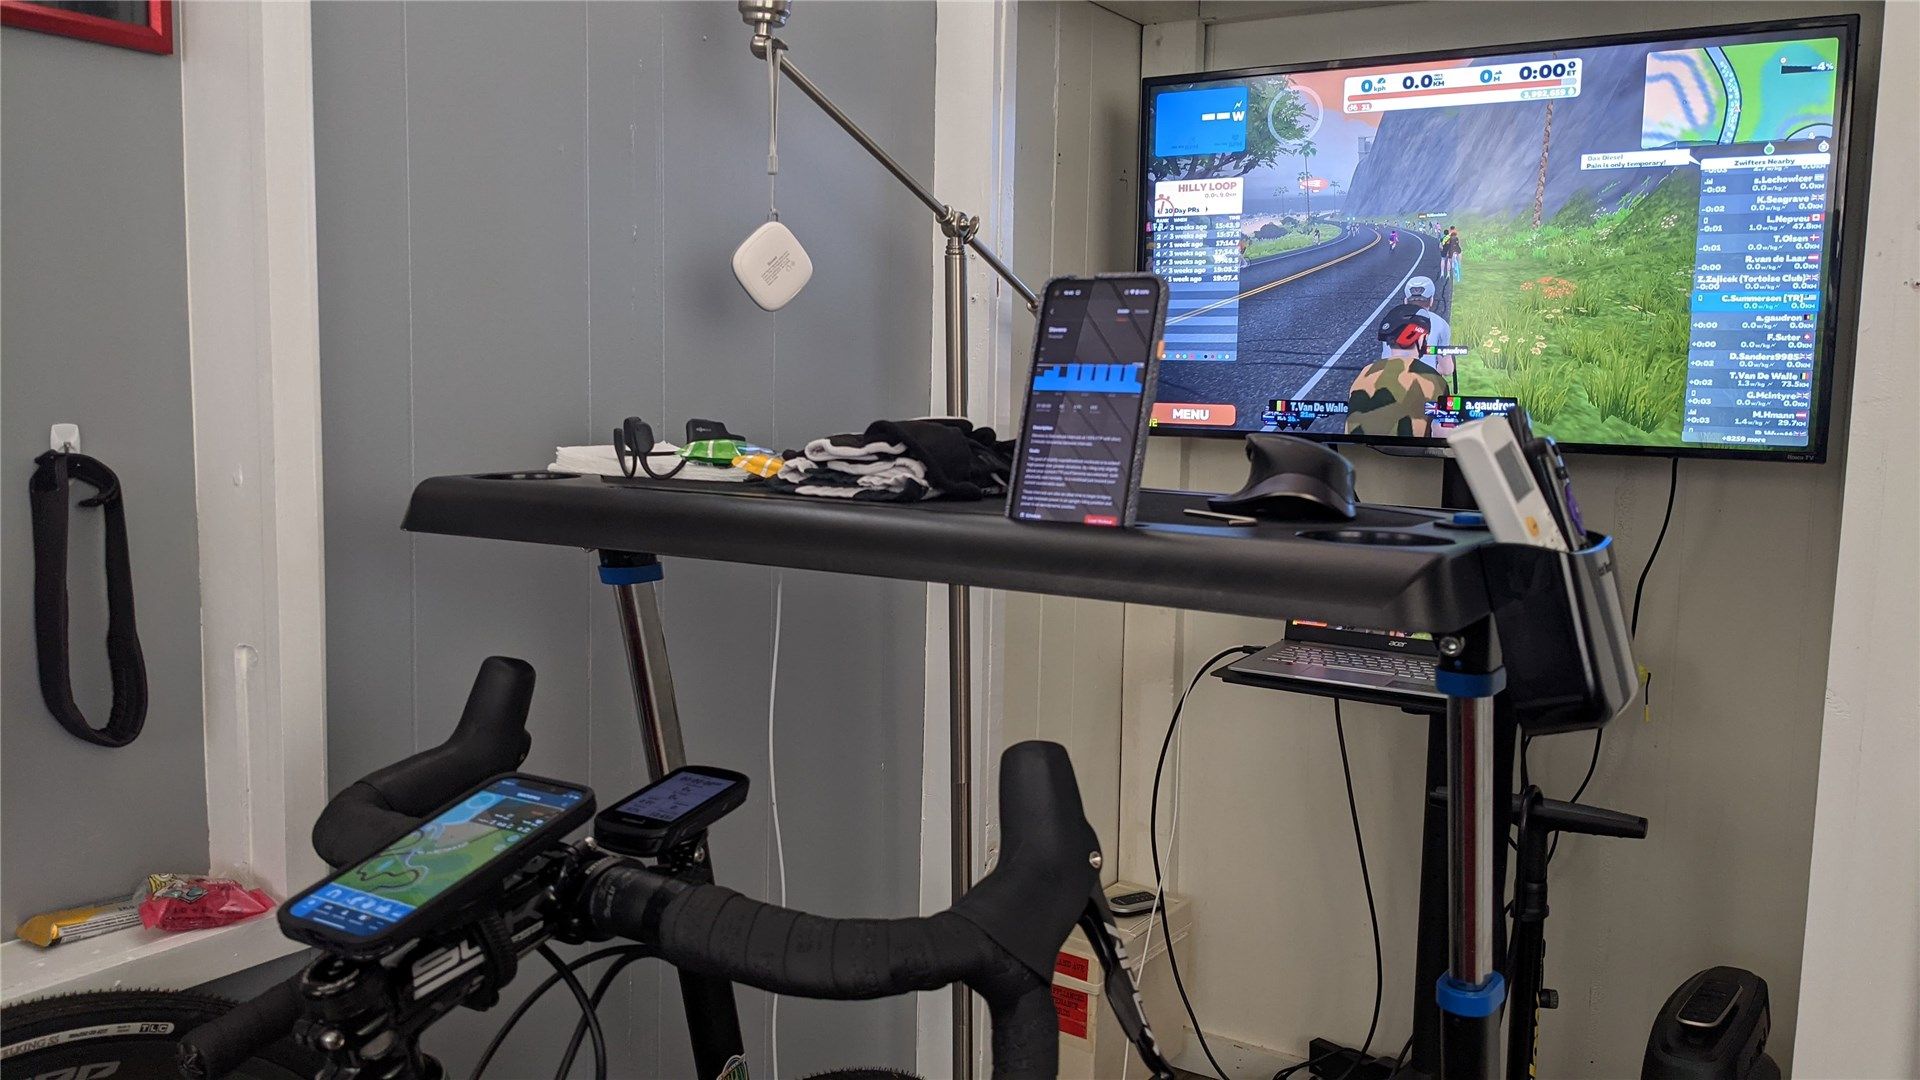 An indoor training setup with Zwift on a TV, TrainerRoad on a phone, and Gearlock holding an iPhone with the Zwift companion app.